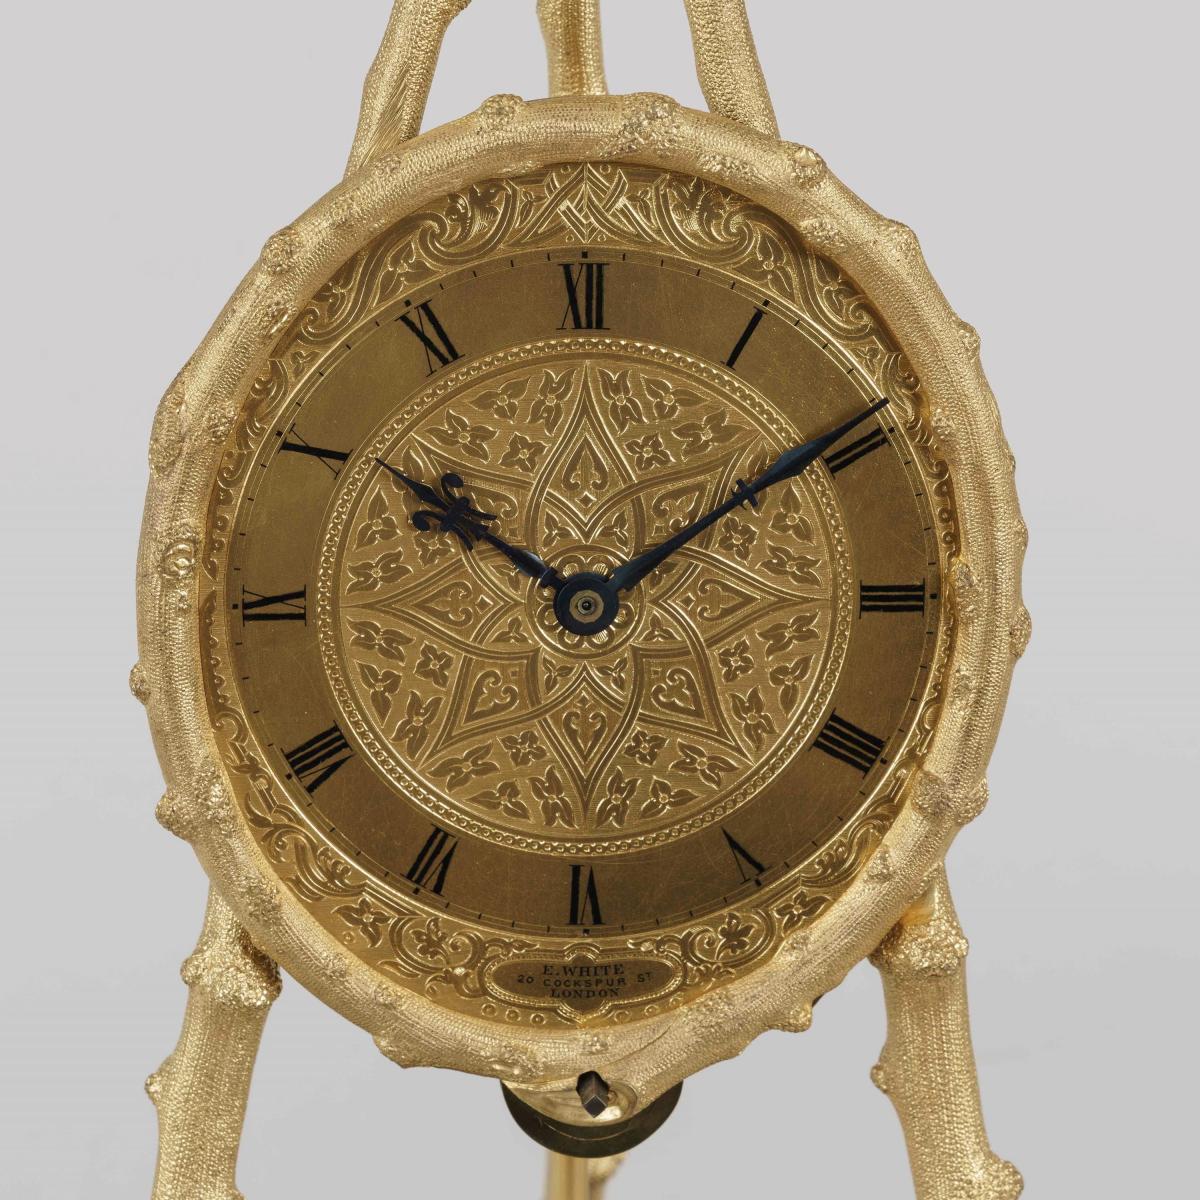 Rustic Tripod Table Clock by Thomas Cole